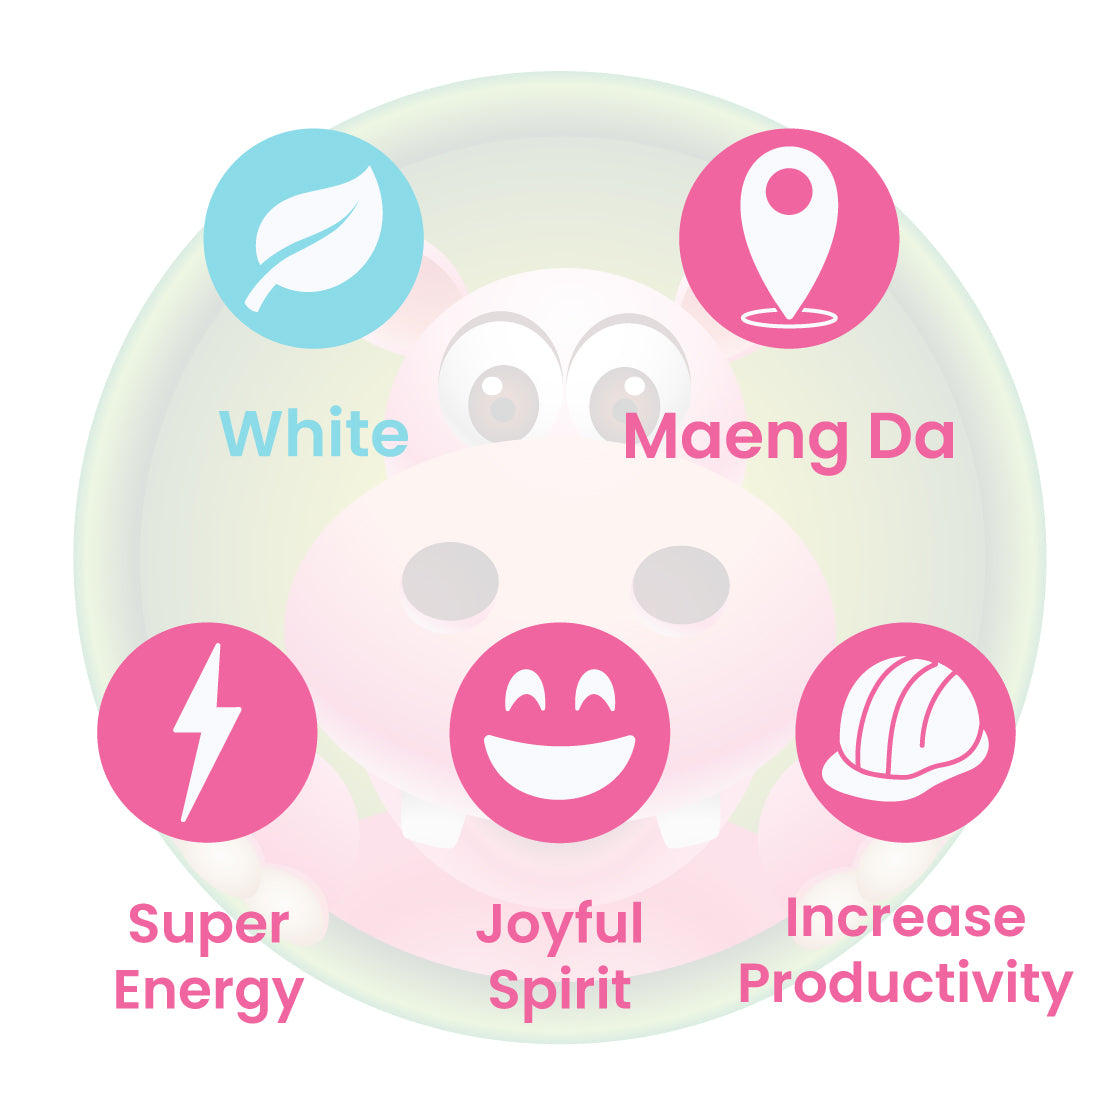 Infographic Details for Happy Hippo White Vein Maeng Da Kratom Powder. Leaf color: White Vein. Kratom Strain Origin: Maeng Da. Kratom Effects resonate with Focus, Workout Boost, and Super Energy.